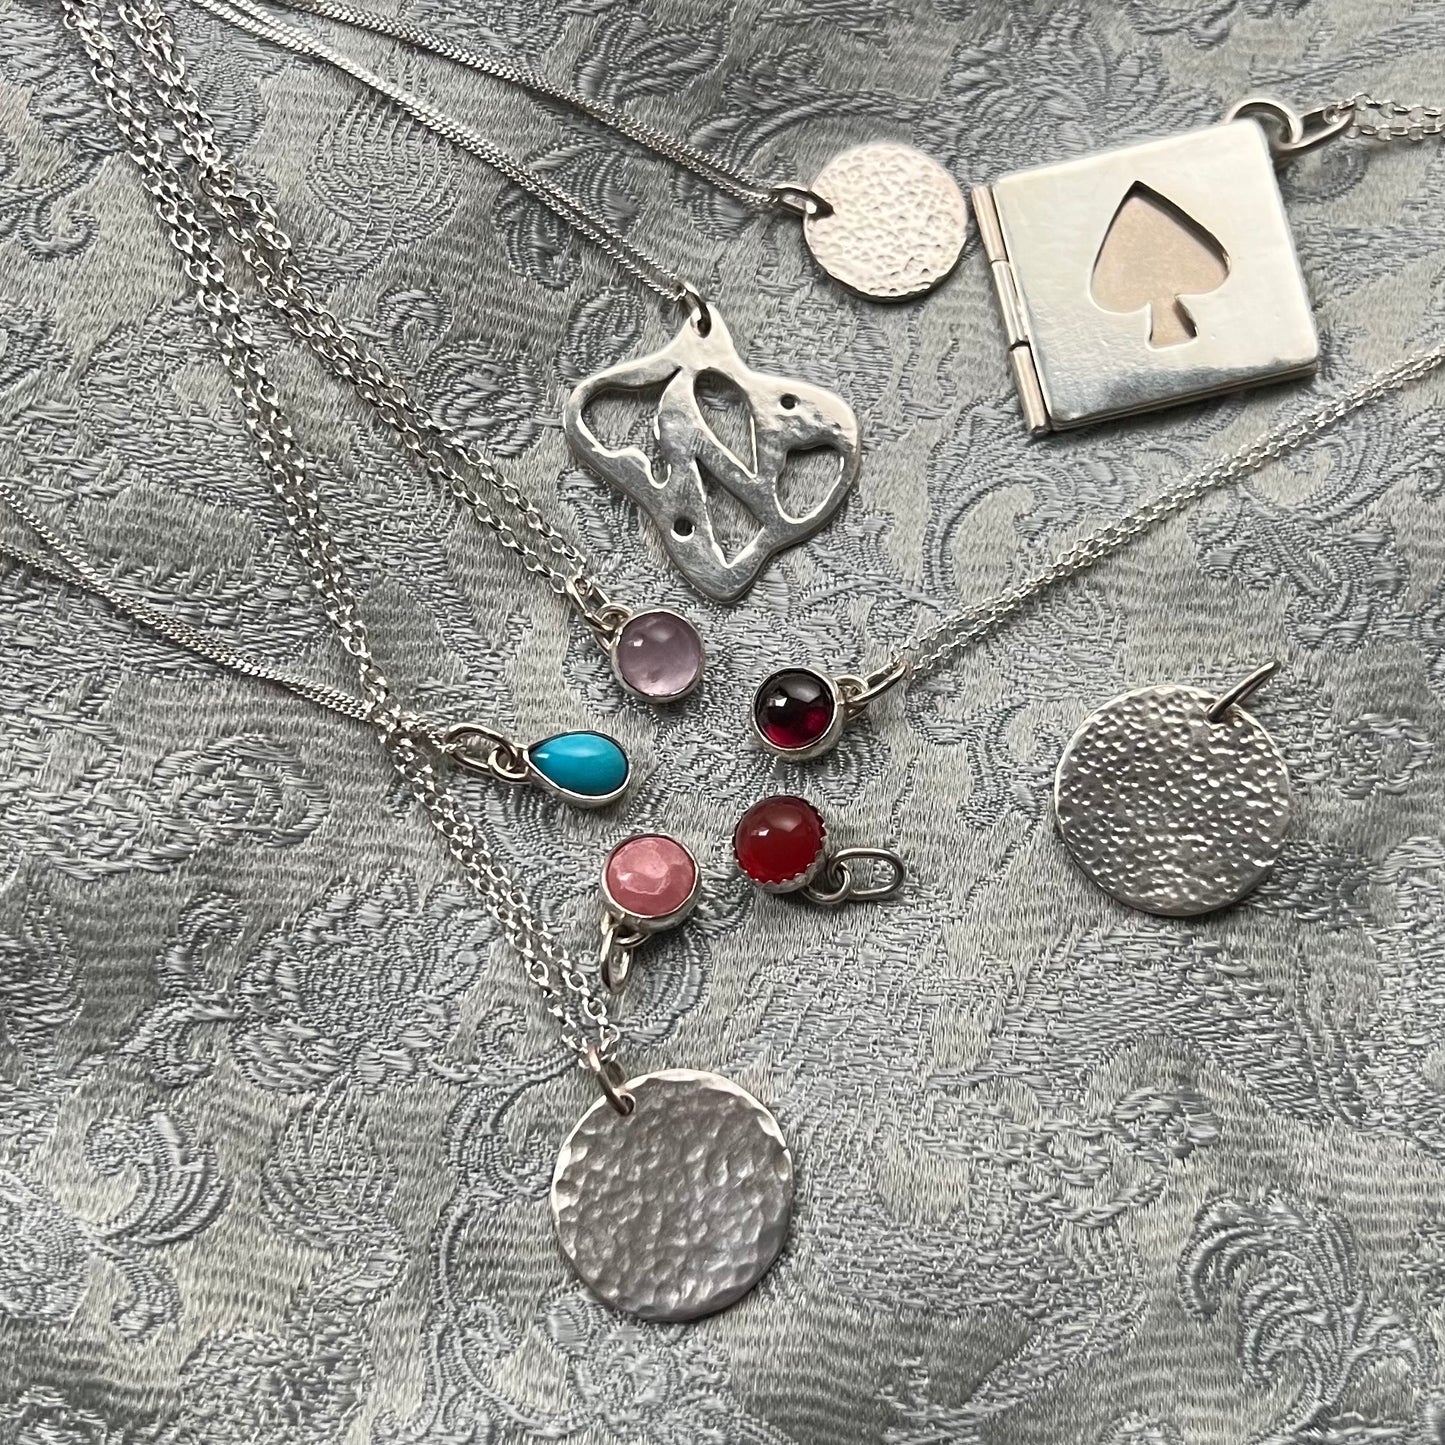 This picture shows a variety of sterling silver pendants including several bezel set gemstone charms.